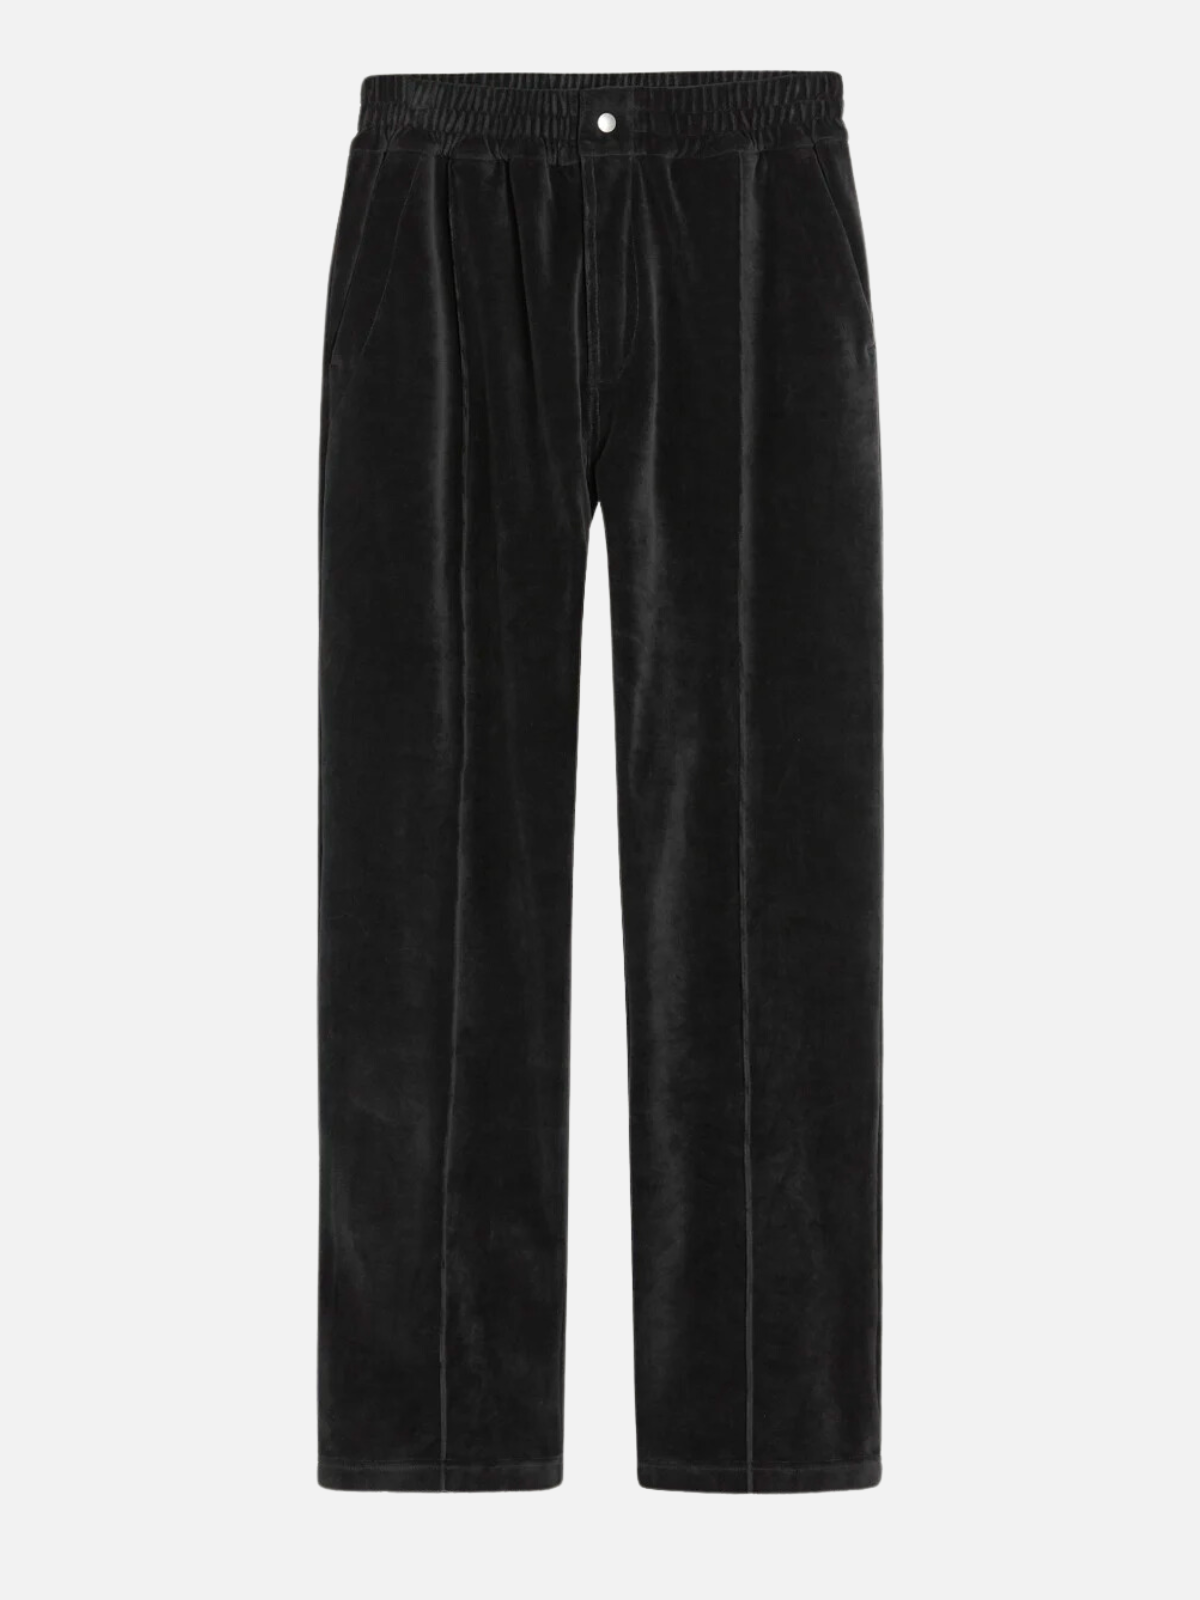 OAS Company Velour Pant Nearly Black Relaxed Fit Pant Kempt Mens Clothing Athens GA